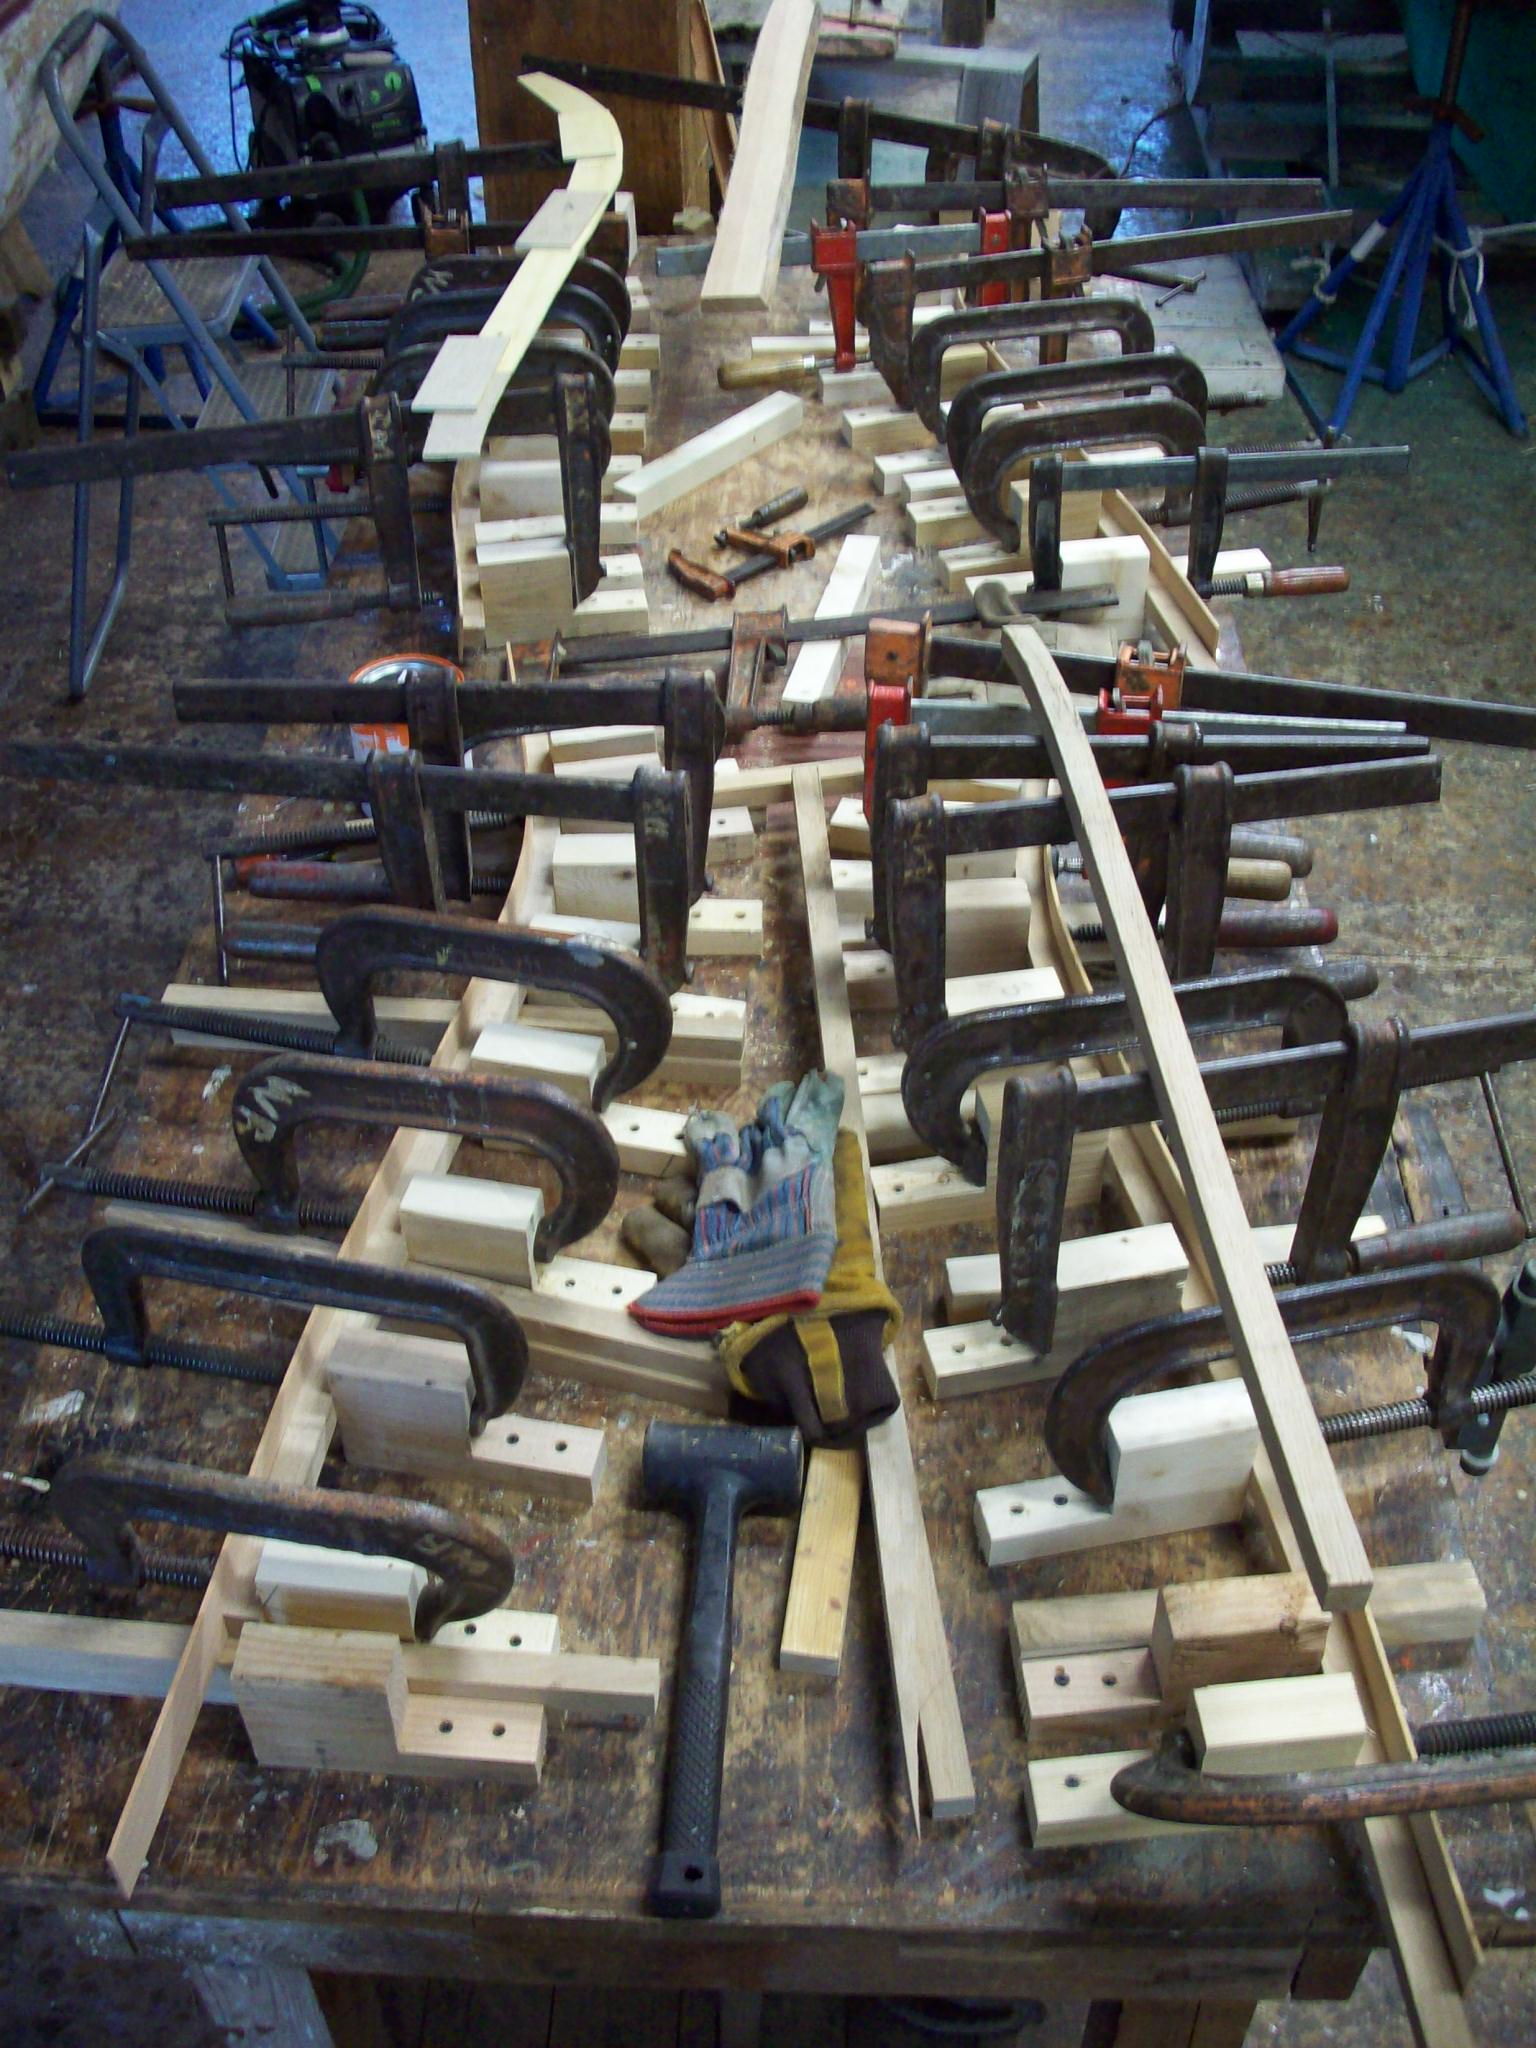 Steam bent parts holding blocks in place